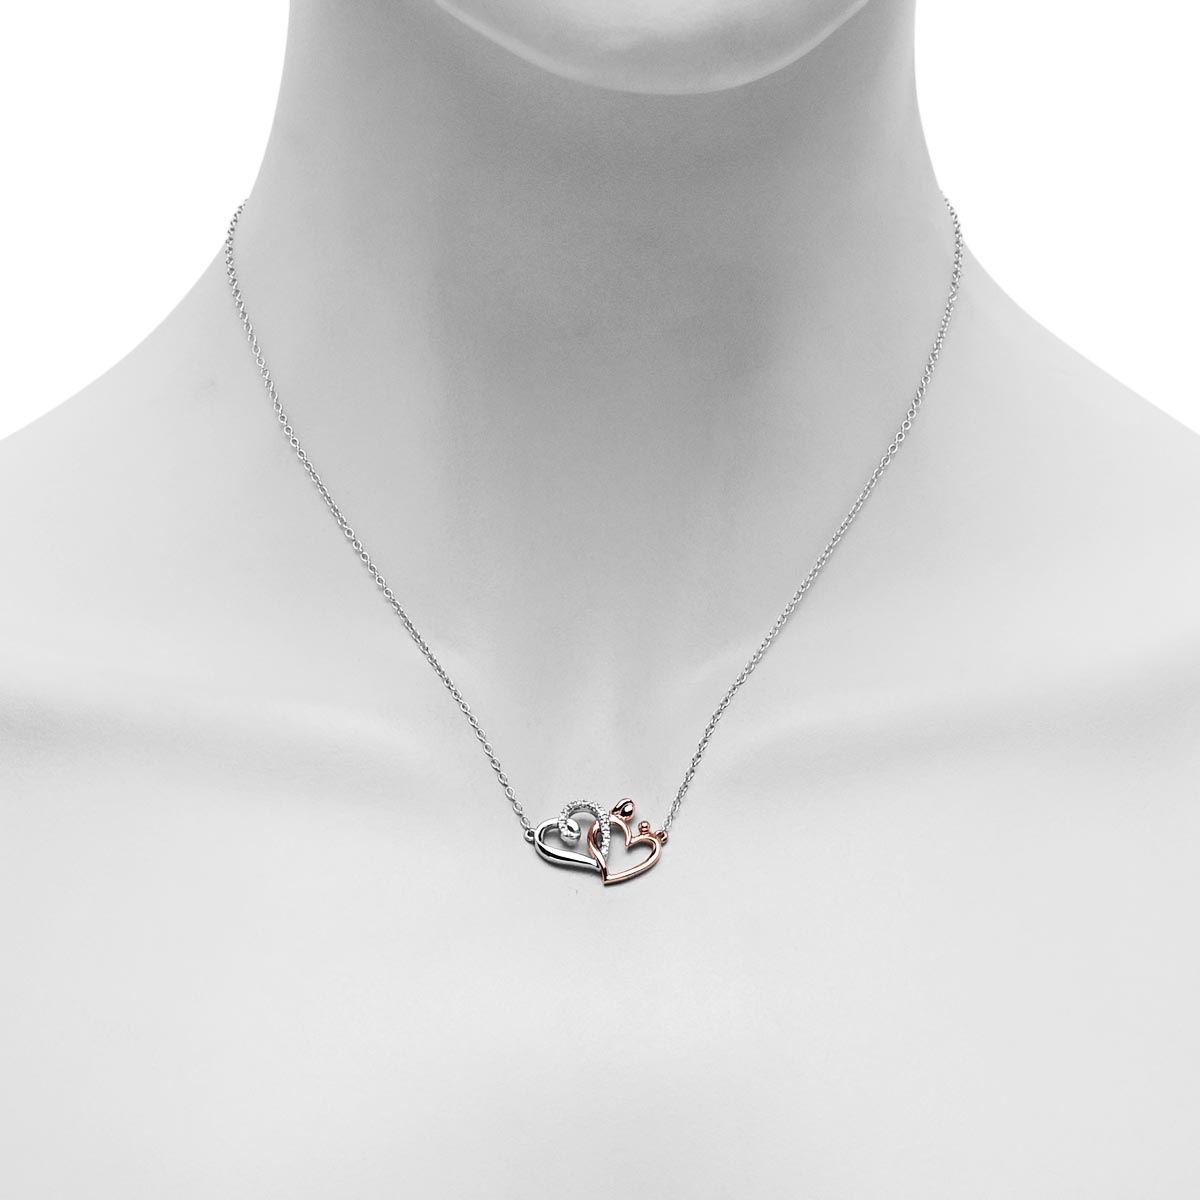 Mother and Child Double Heart Necklace in Sterling Silver and Rose Gold Plate with Diamonds (1/20ct tw)